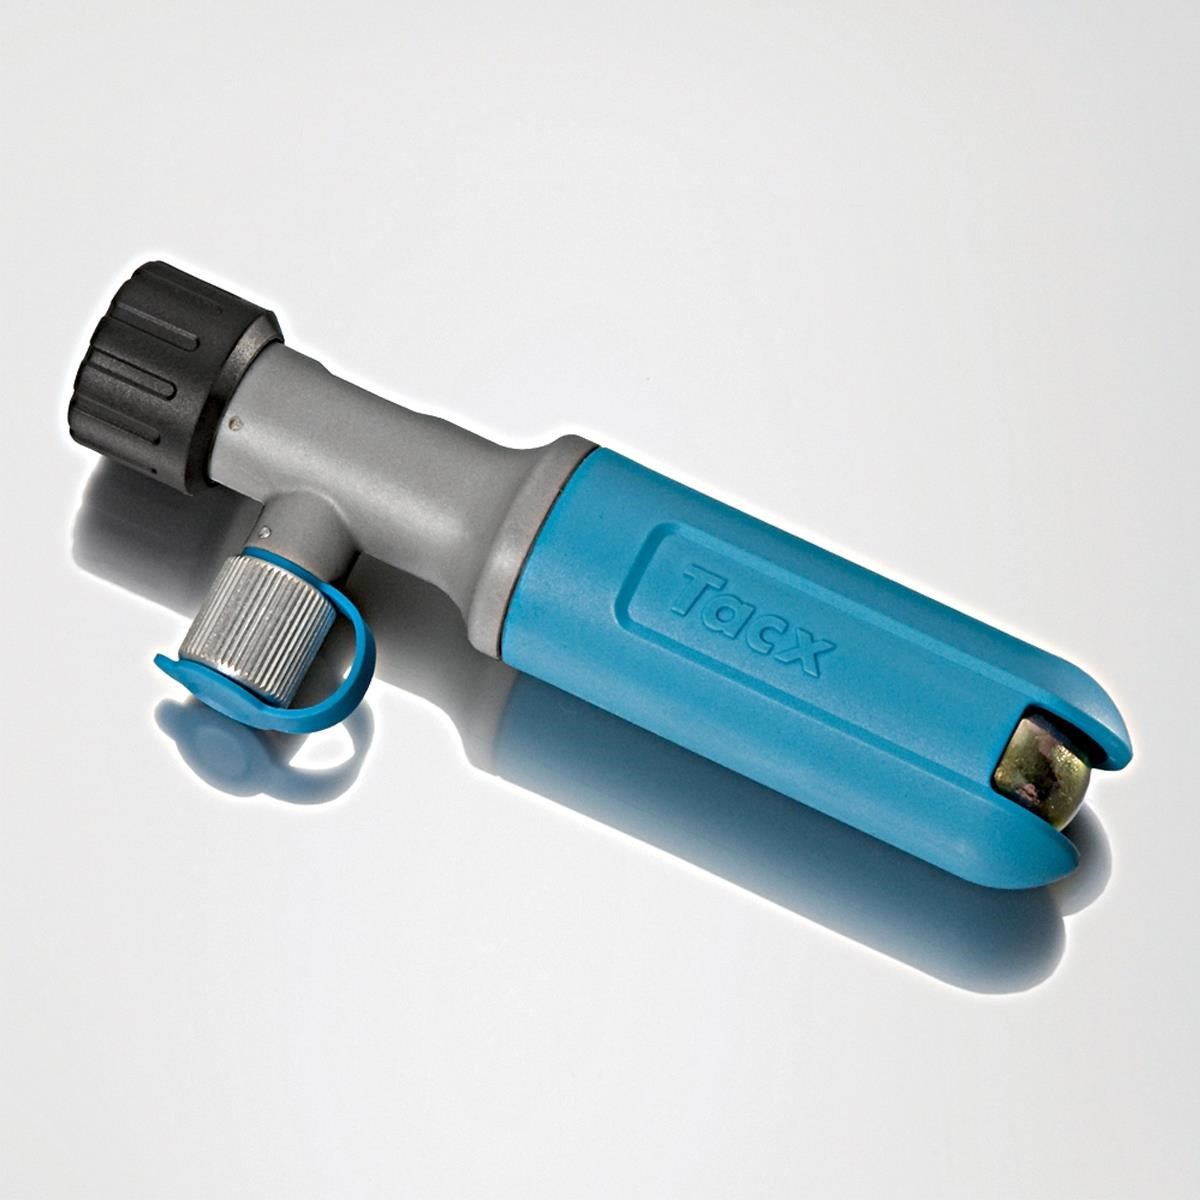 Tacx Co2 Inflator product image